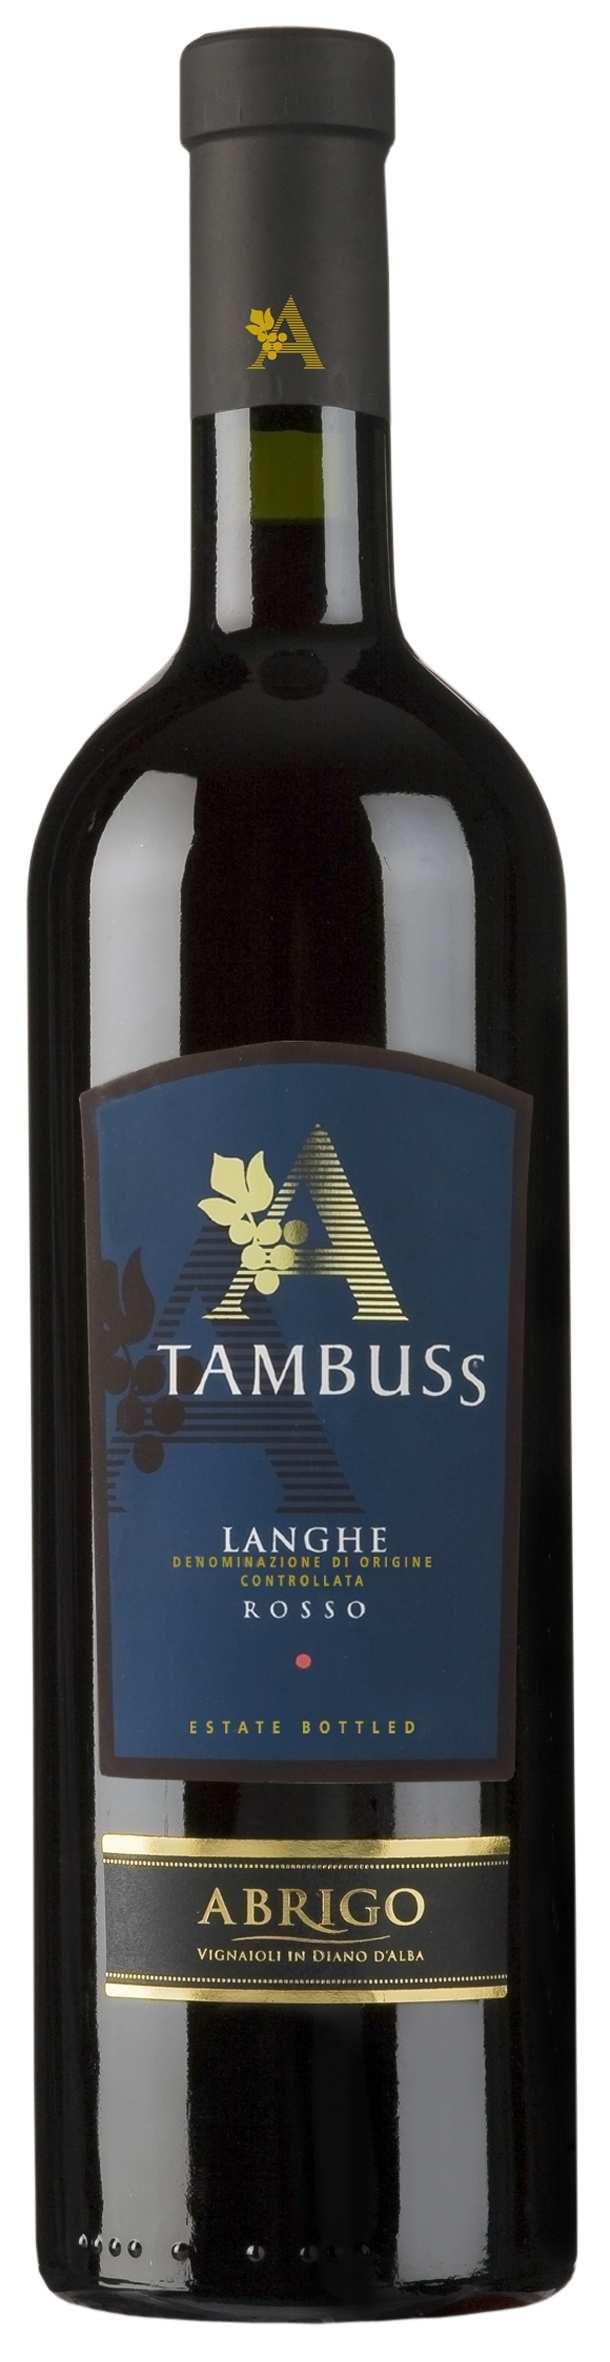 LANGHE DOC ROSSO TAMBUSS A SURPRISING WINE OCCASIONS KNOCKING AT THE DOOR ON GREAT Vine: 50% Nebbiolo, 25% Barbera, 25% Cabernet Sauvignon Vineyard: estate vineyards, south-west exposure Harvest